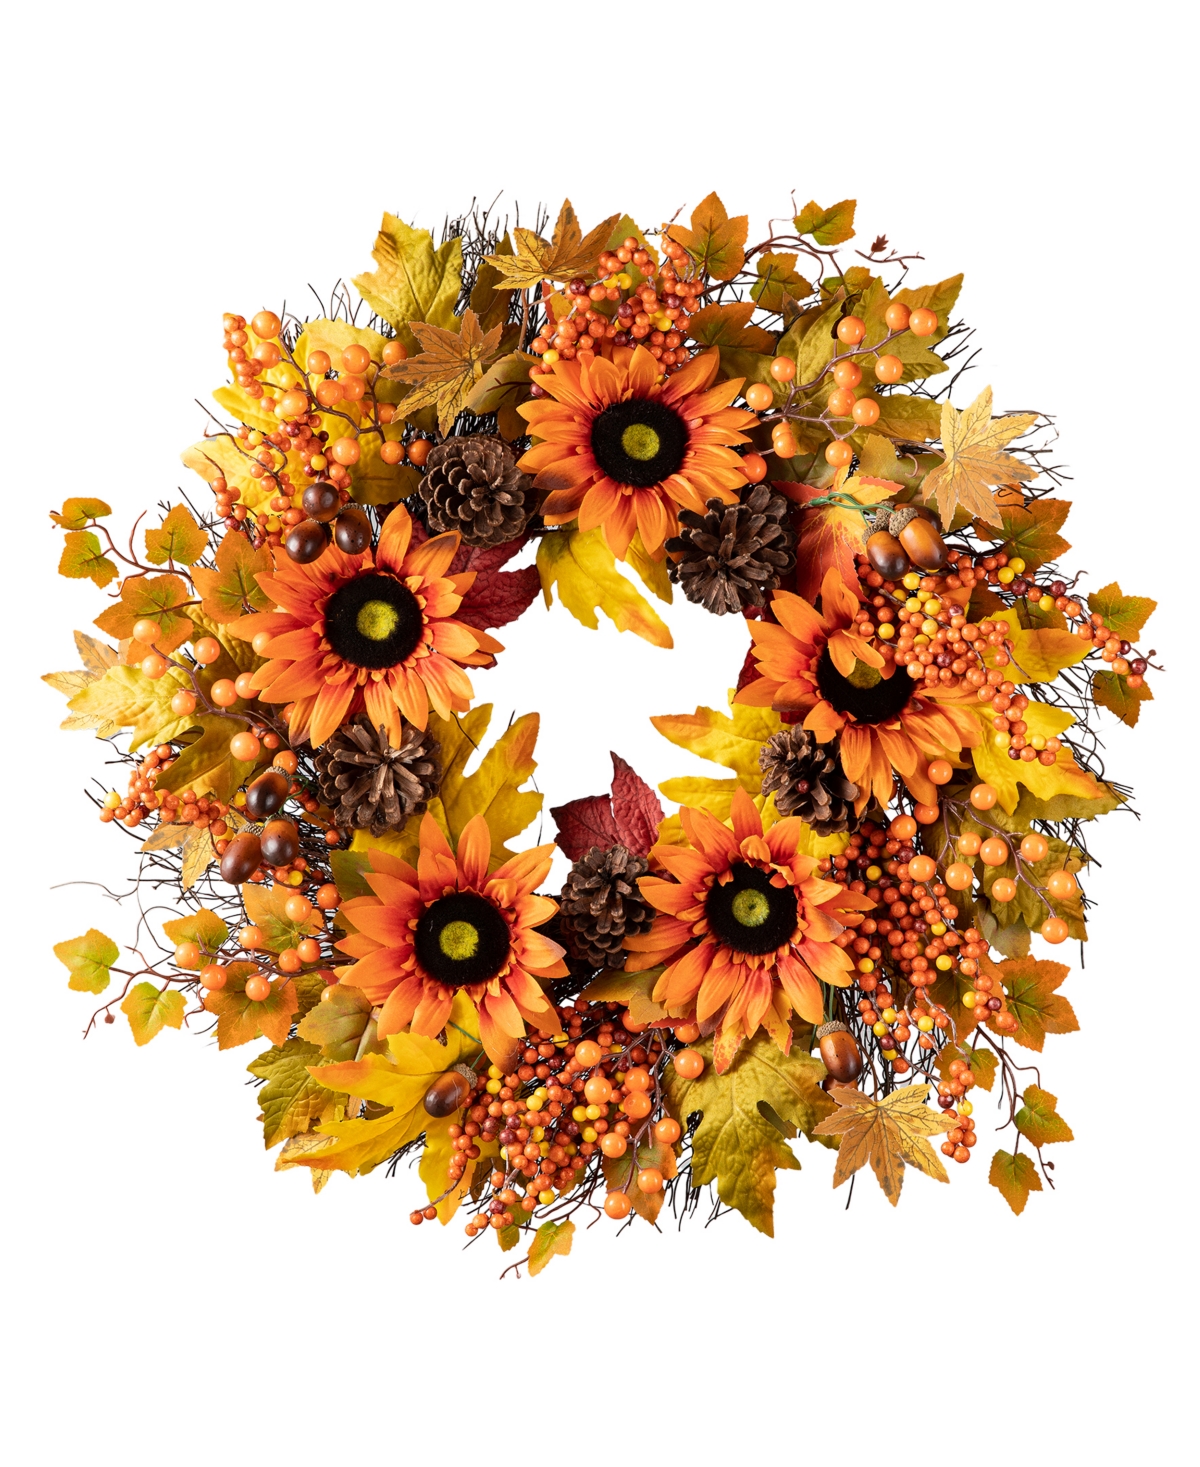 24"D Fall Sunflower, Maple Leaf and Berry Wreath - Multi